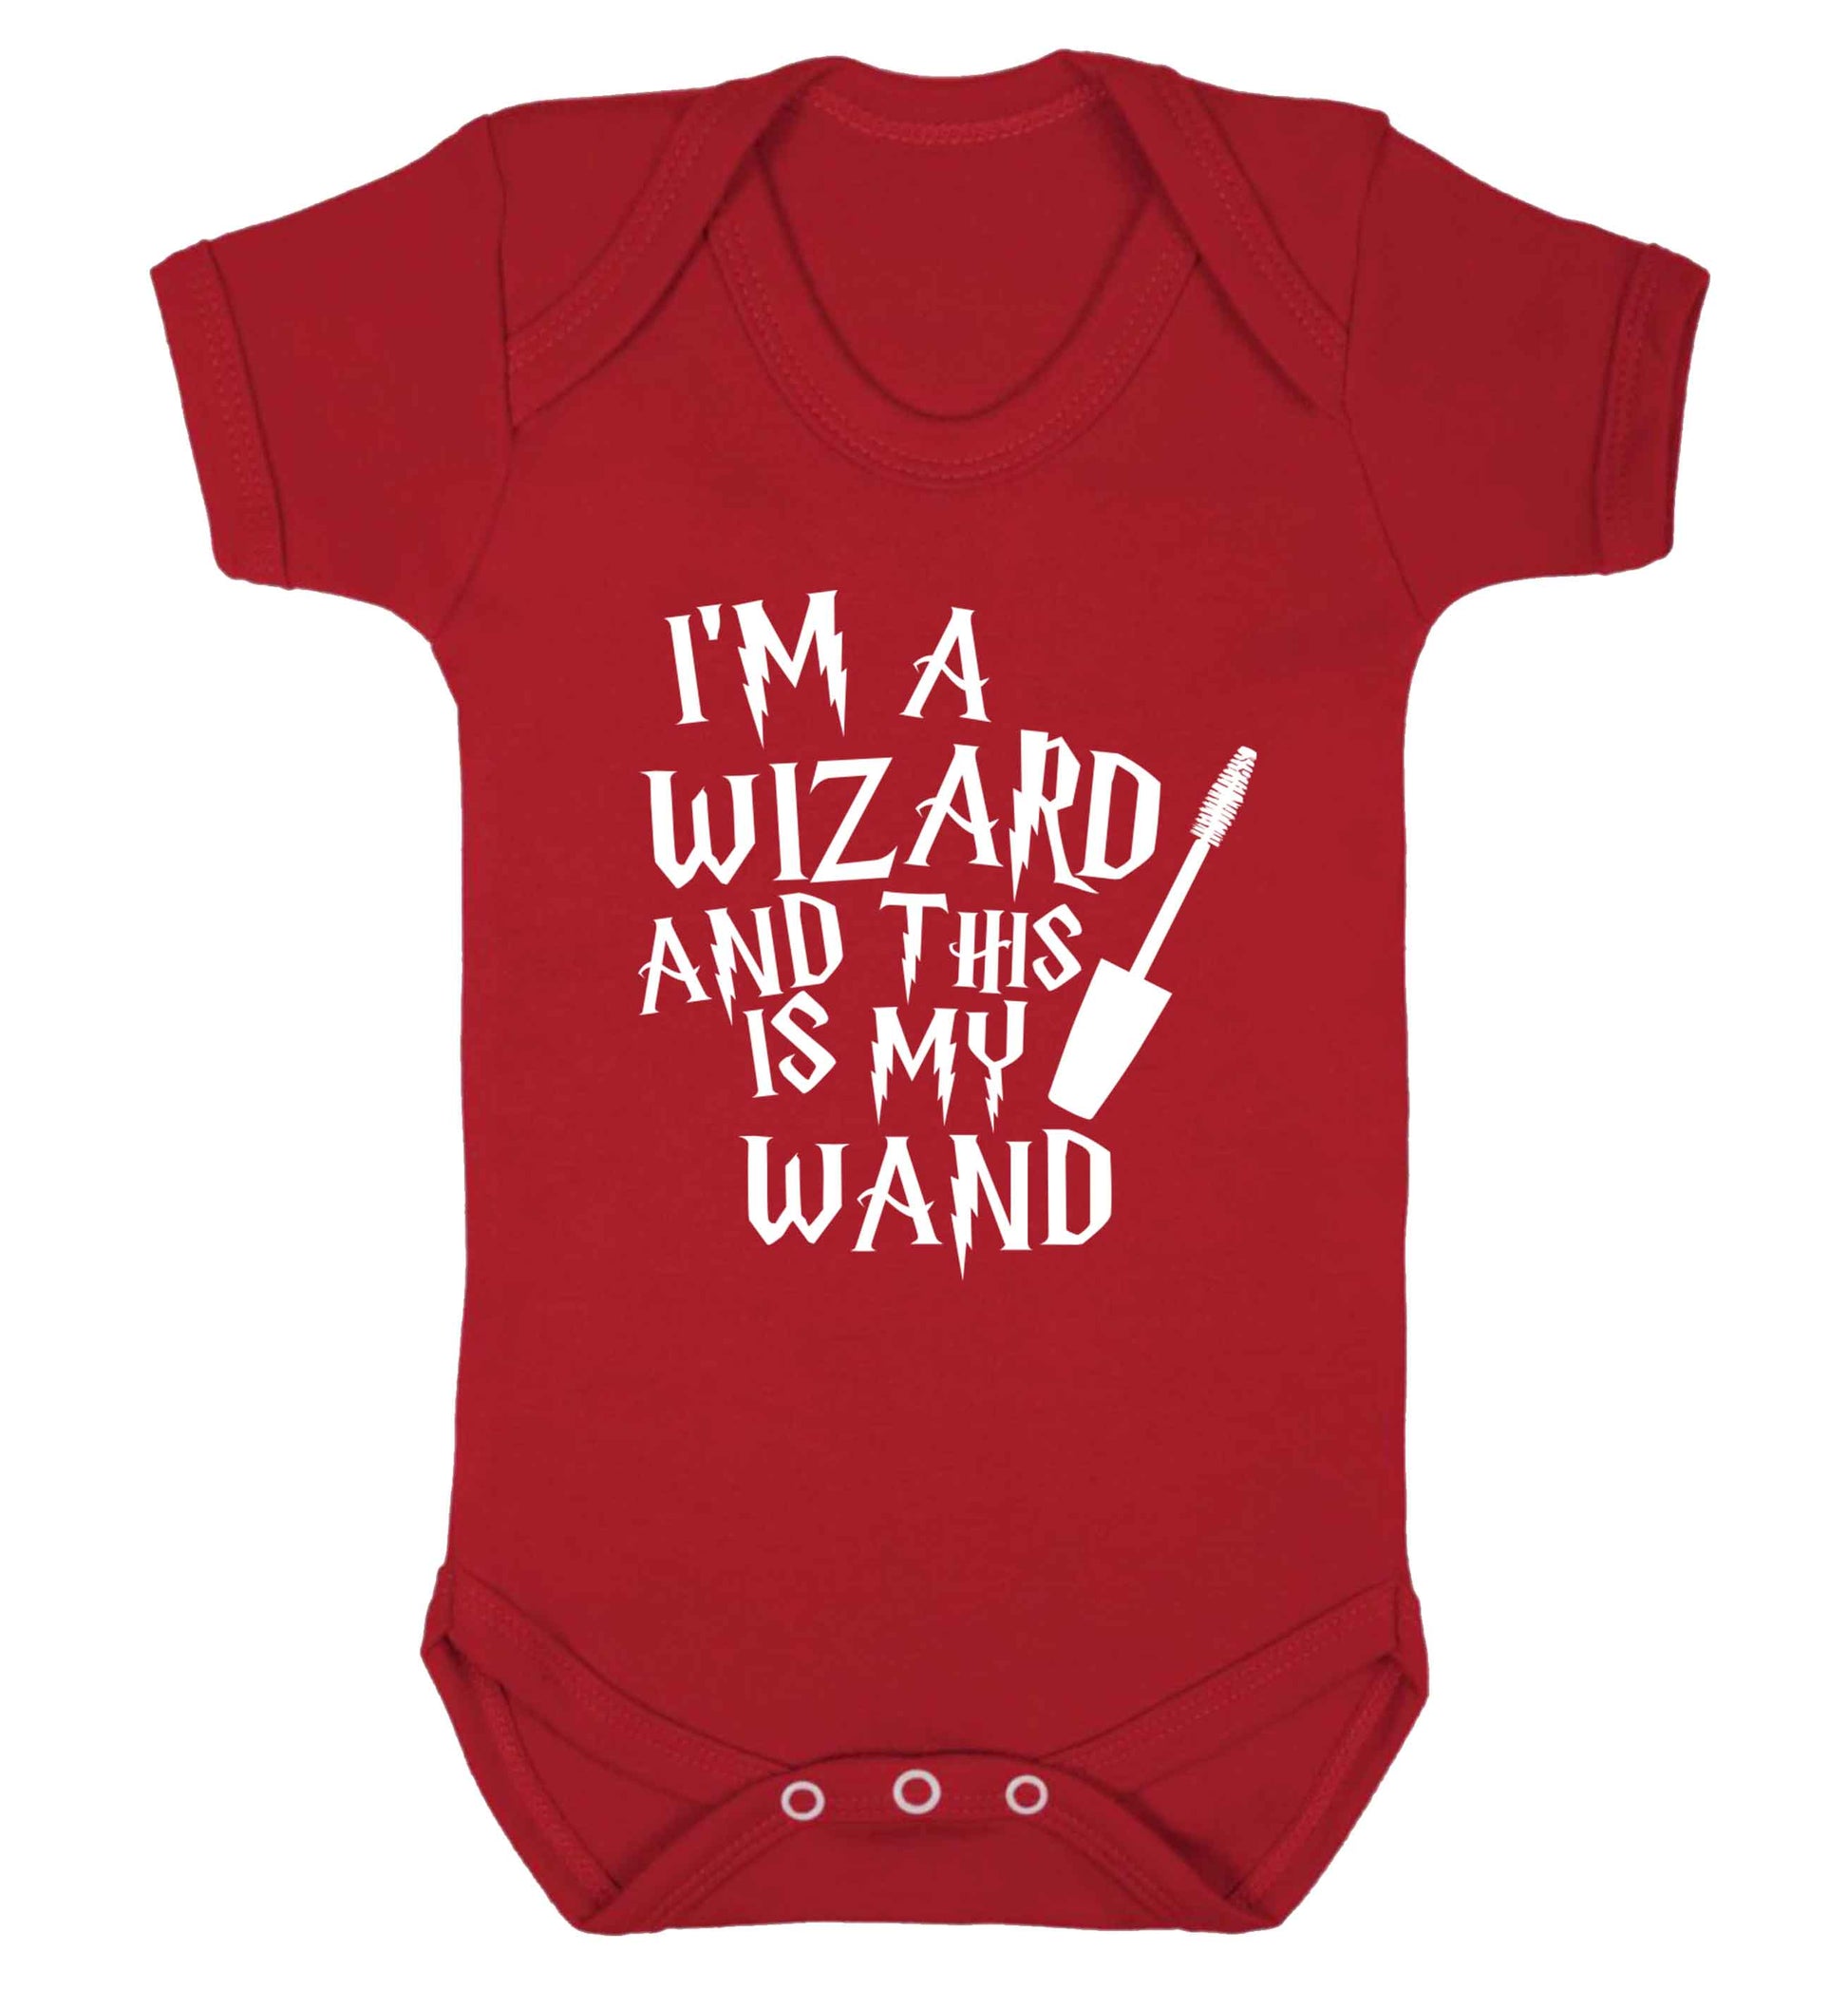 I'm a wizard and this is my wand Baby Vest red 18-24 months